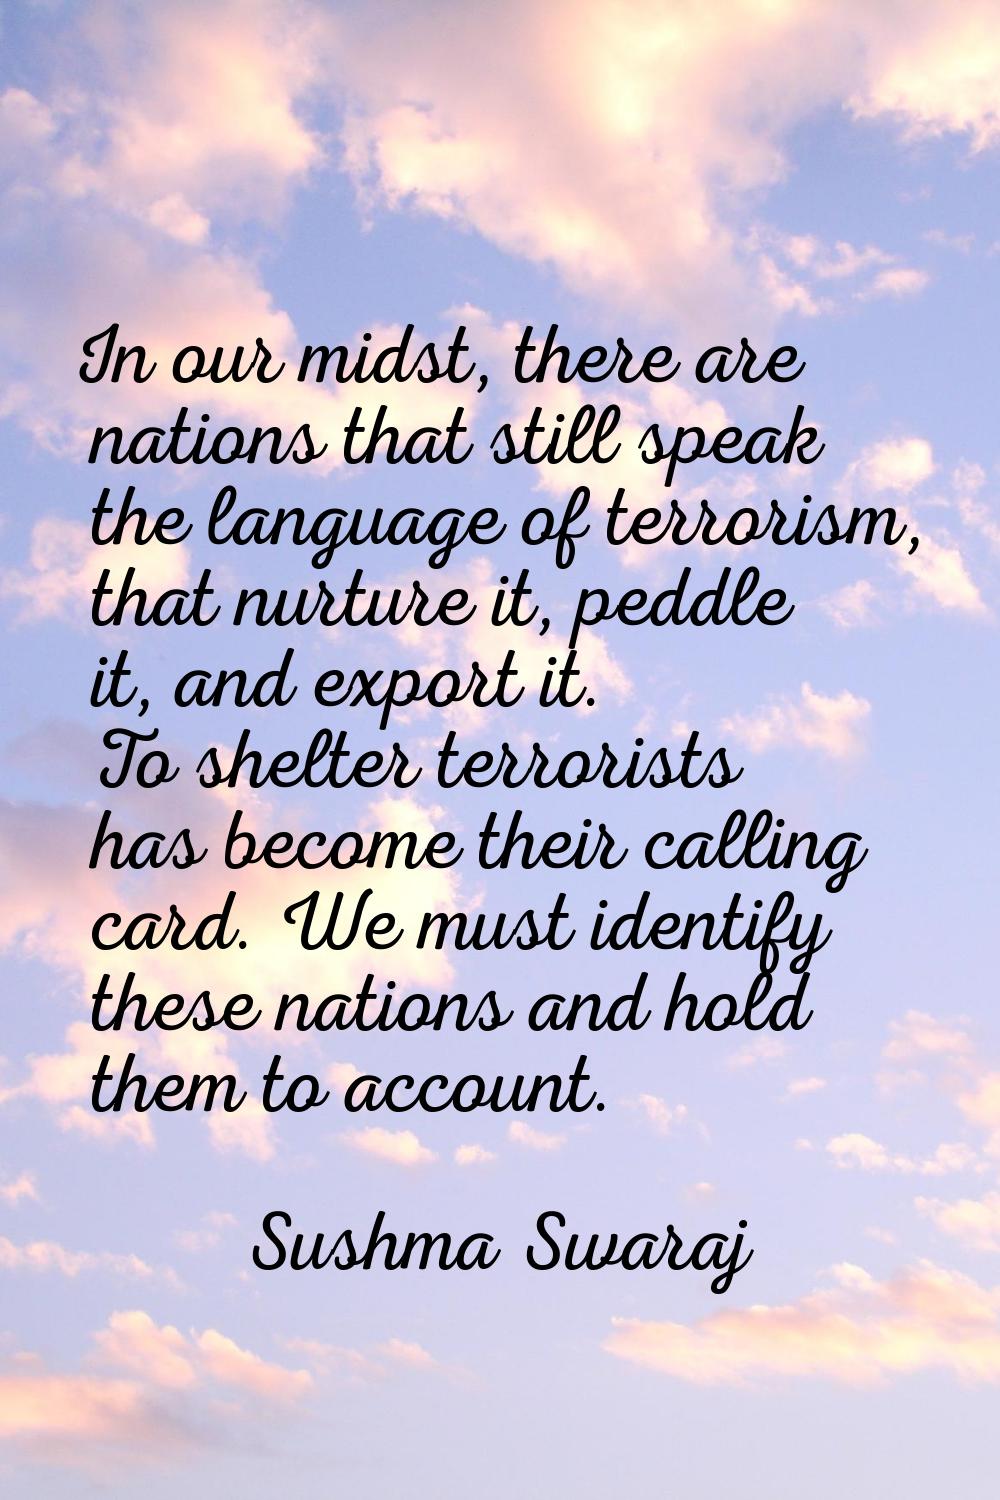 In our midst, there are nations that still speak the language of terrorism, that nurture it, peddle